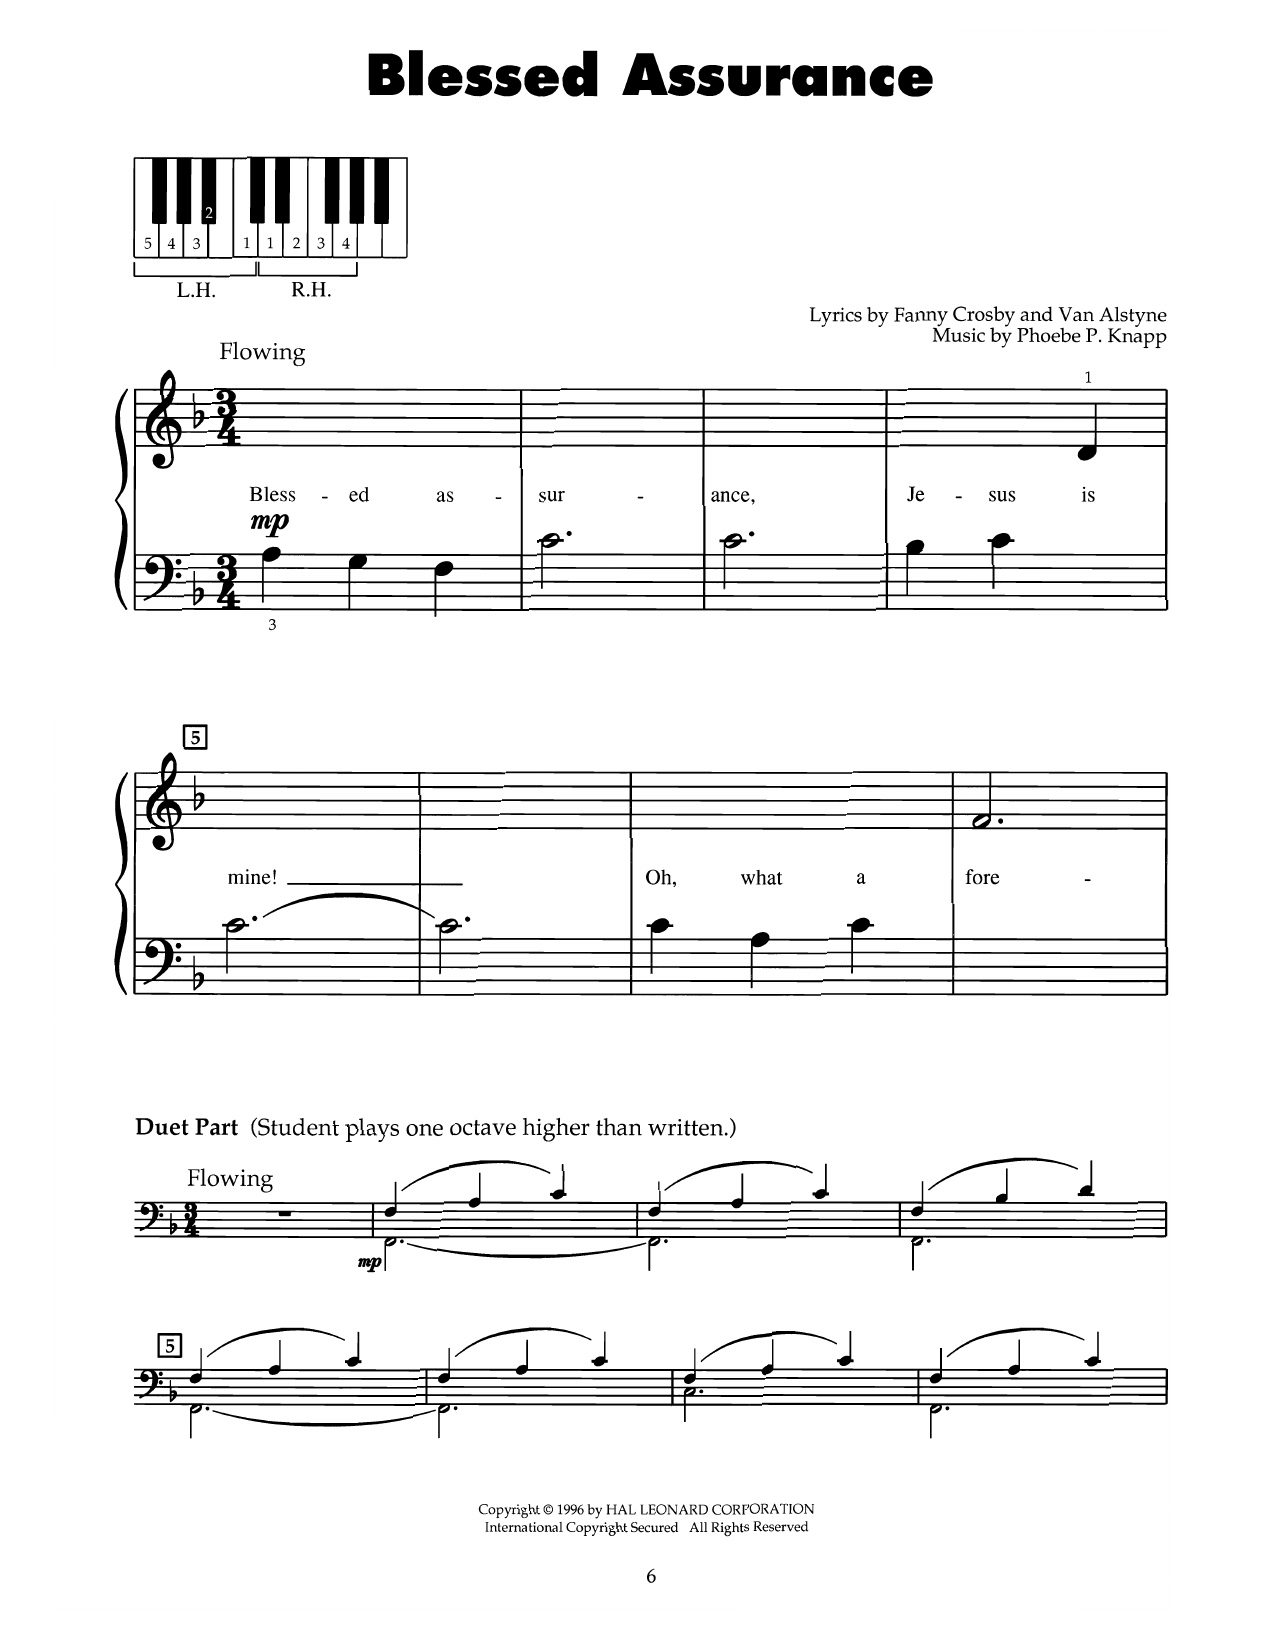 Download Fanny J. Crosby Blessed Assurance Sheet Music